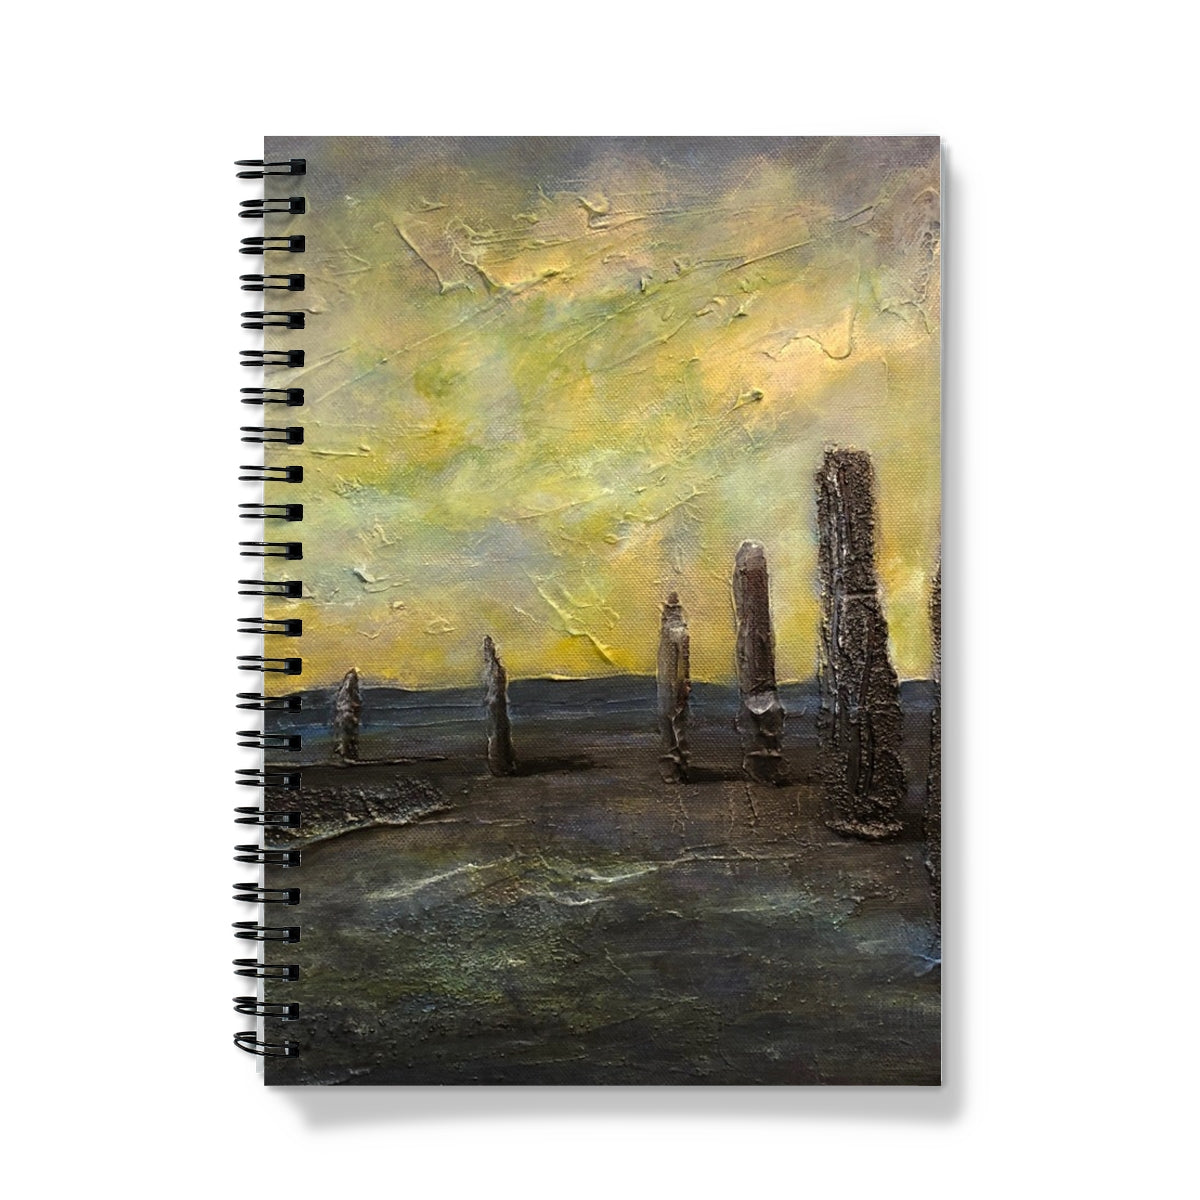 An Ethereal Ring Of Brodgar Art Gifts Notebook-Journals & Notebooks-Orkney Art Gallery-A5-Lined-Paintings, Prints, Homeware, Art Gifts From Scotland By Scottish Artist Kevin Hunter